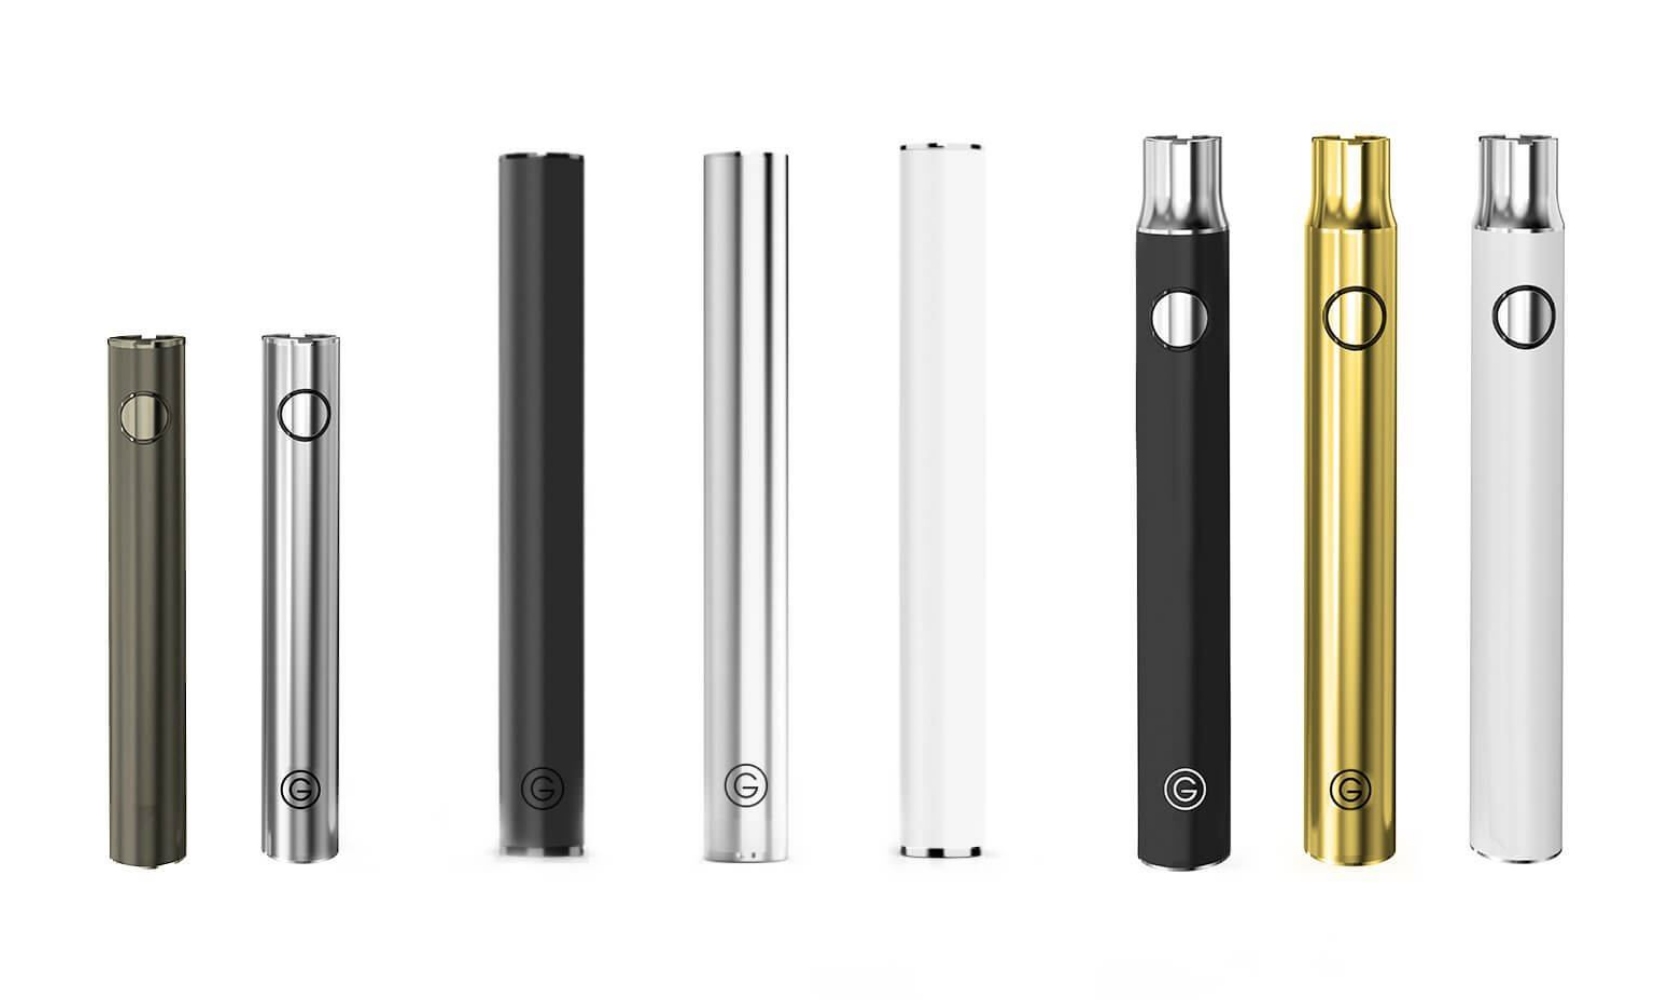 Do all vape pens use the same cartridges? In this blog, we’ll answer the questions & go over where you can find the best vape pens in Canada.